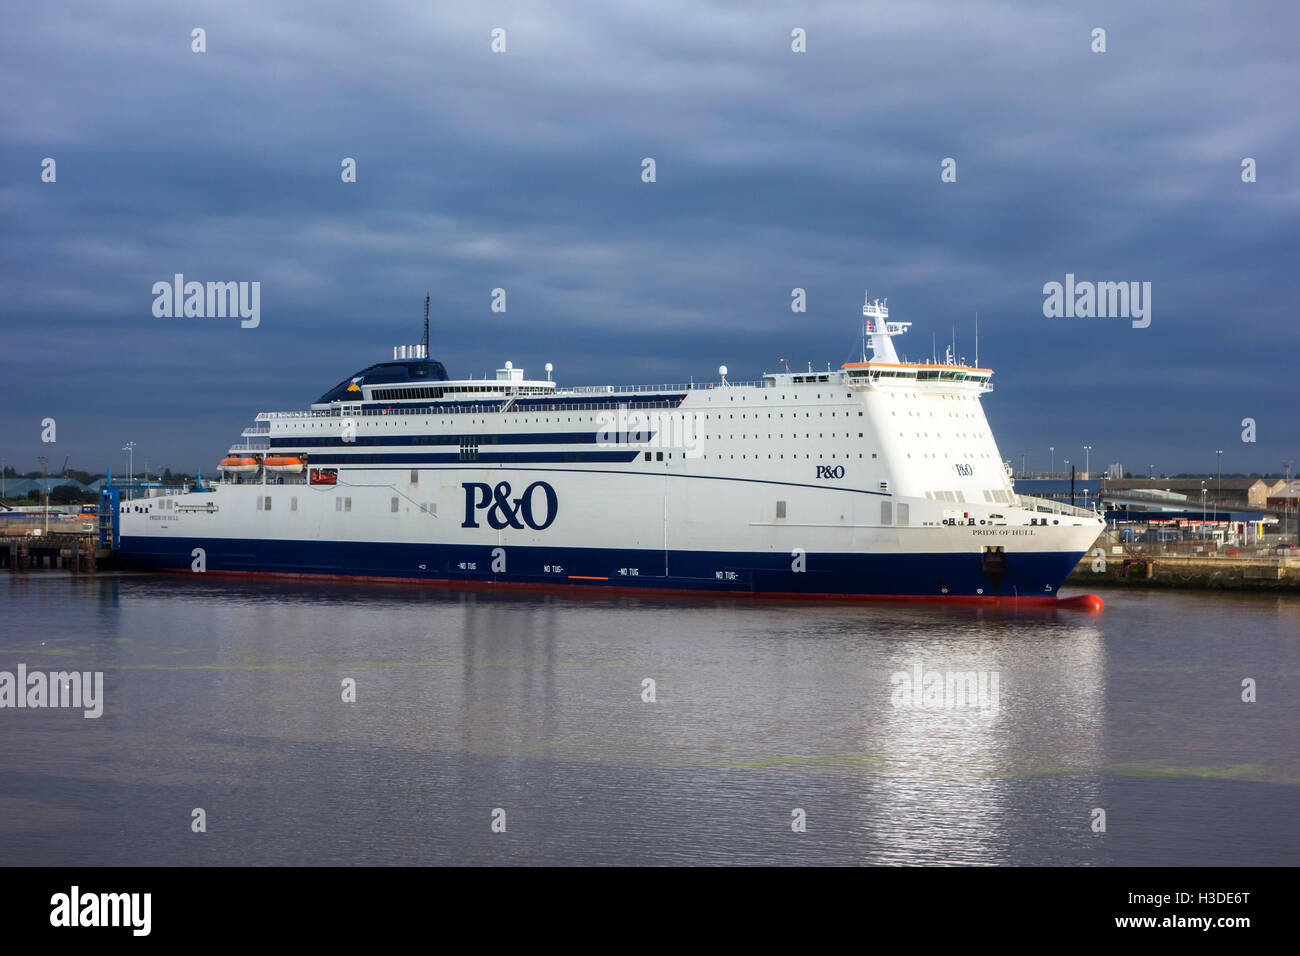 Mme Pride of Hull, P&O North Sea Ferries passagers et fret des navire dans le port de Kingston Upon Hull, England, UK Banque D'Images